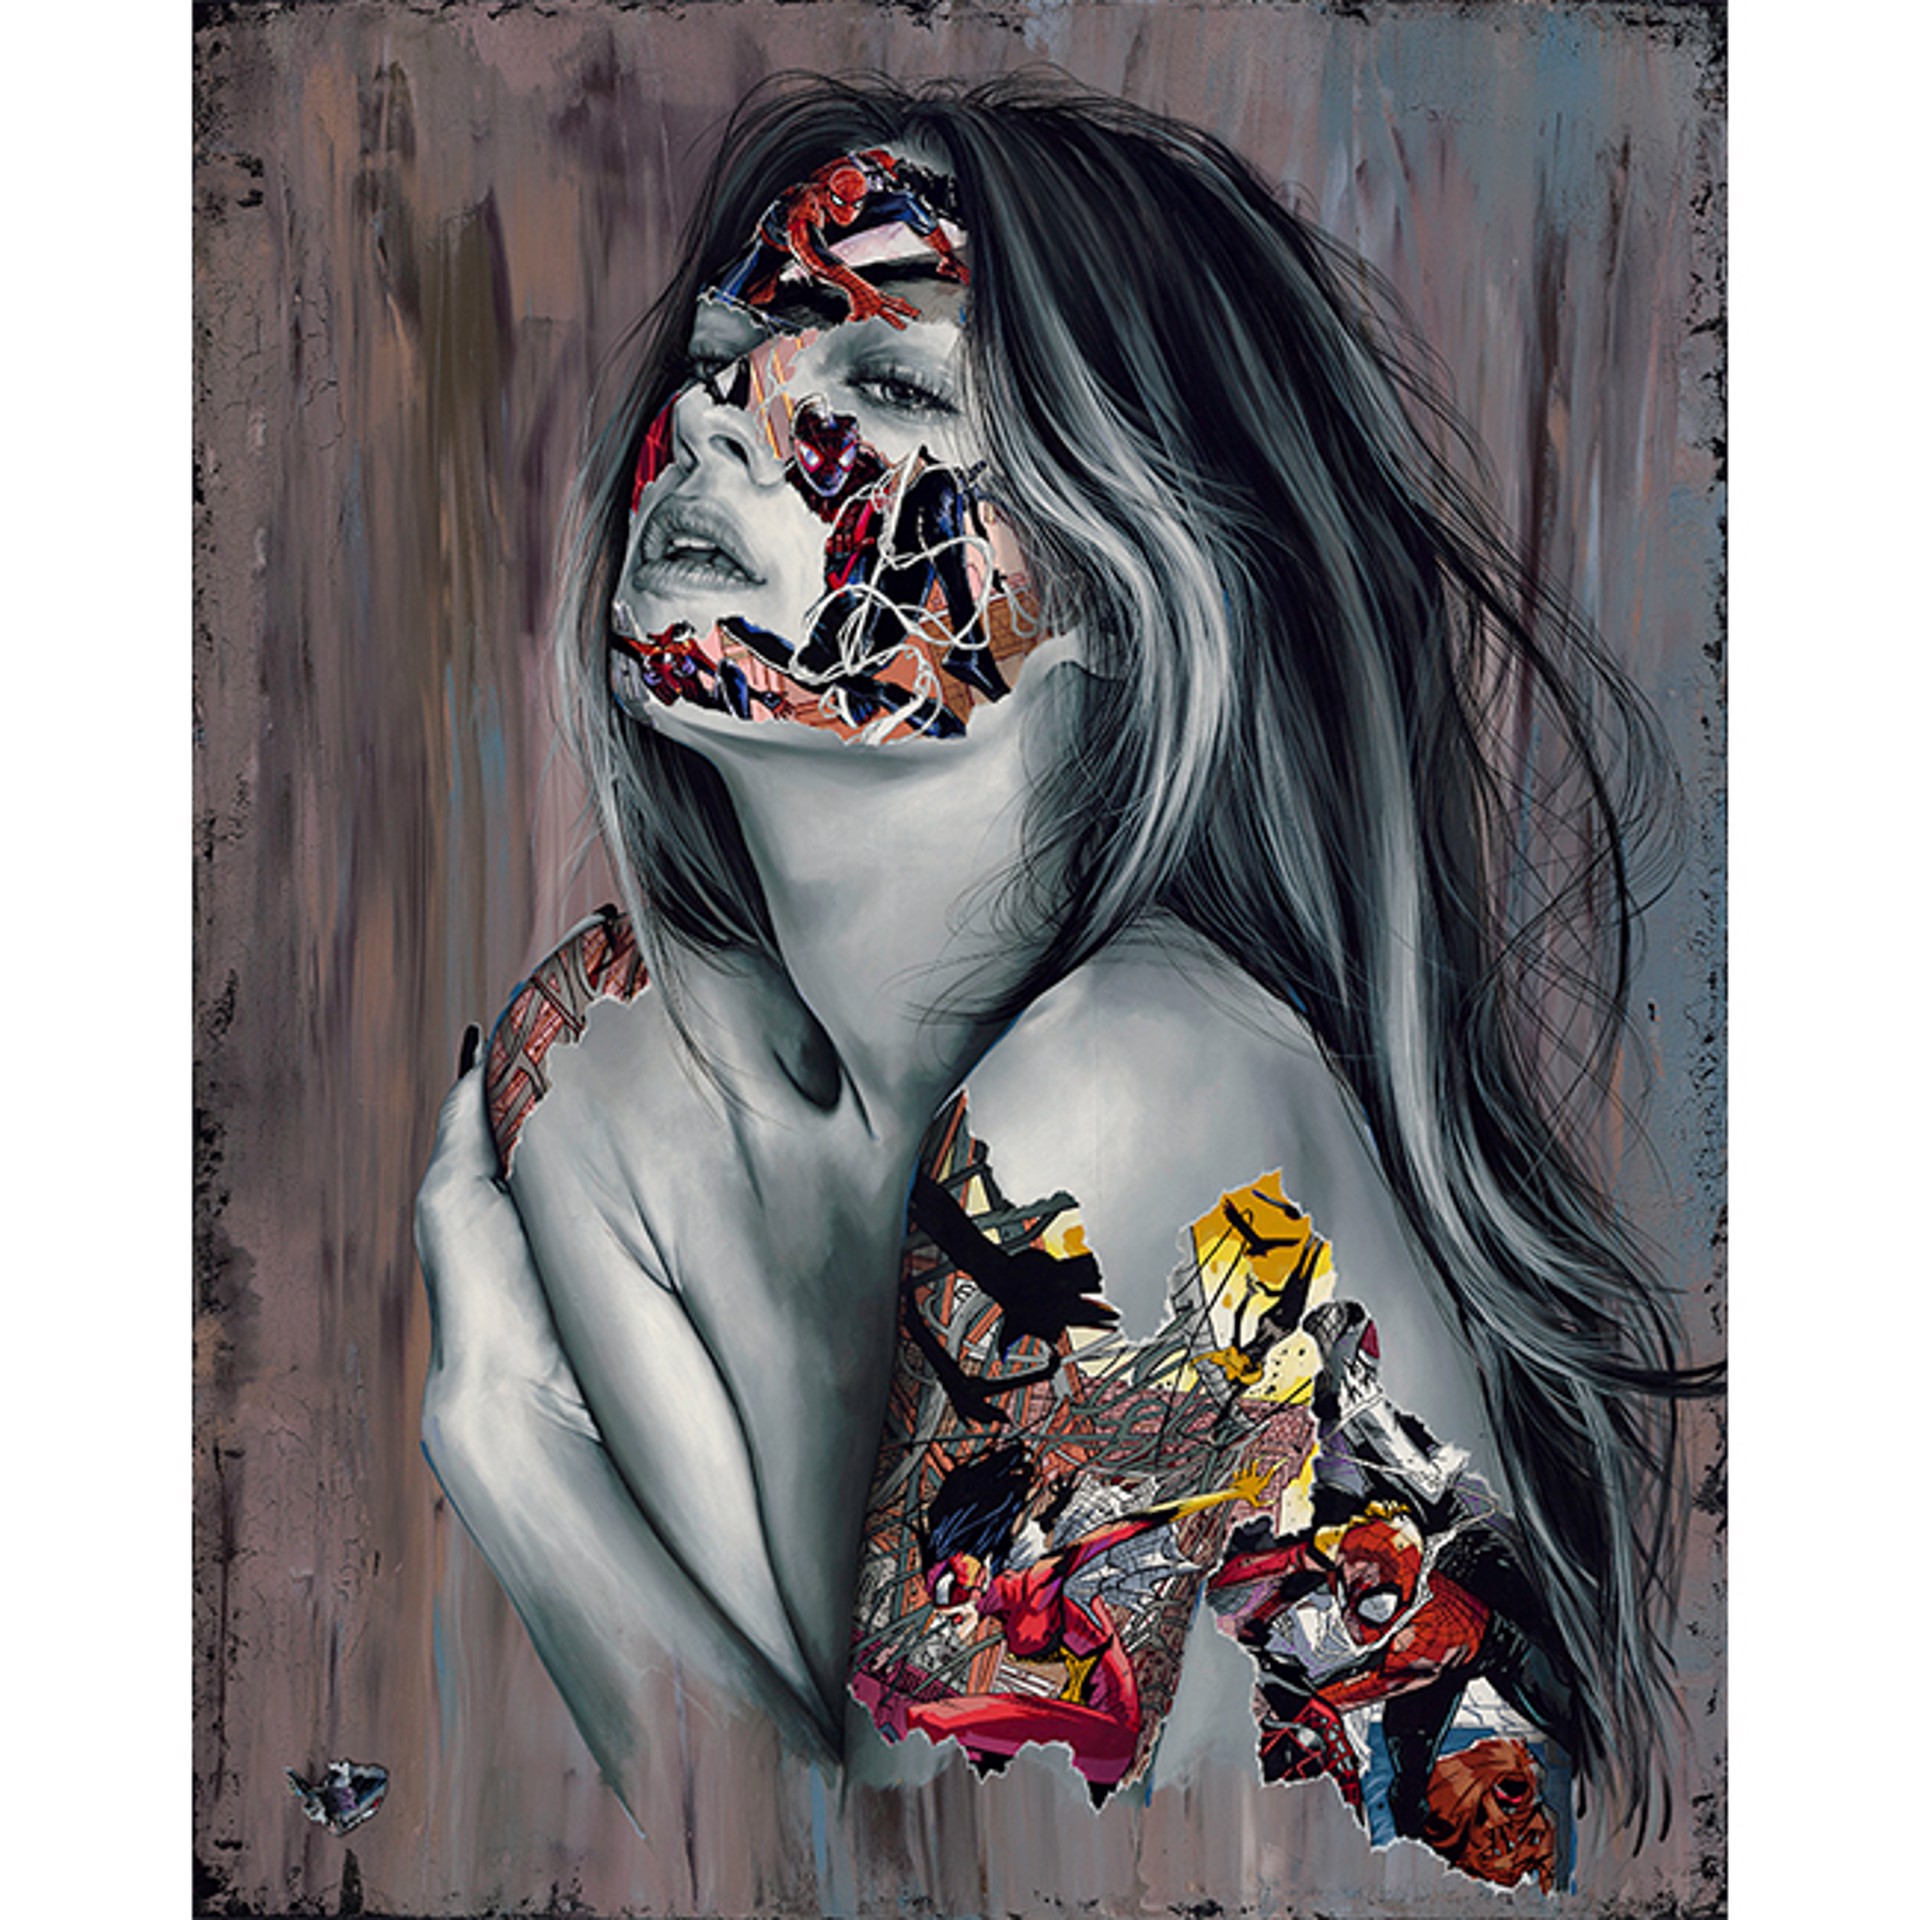 The Cage of Waking Dreams and Spread Wings by Sandra Chevrier